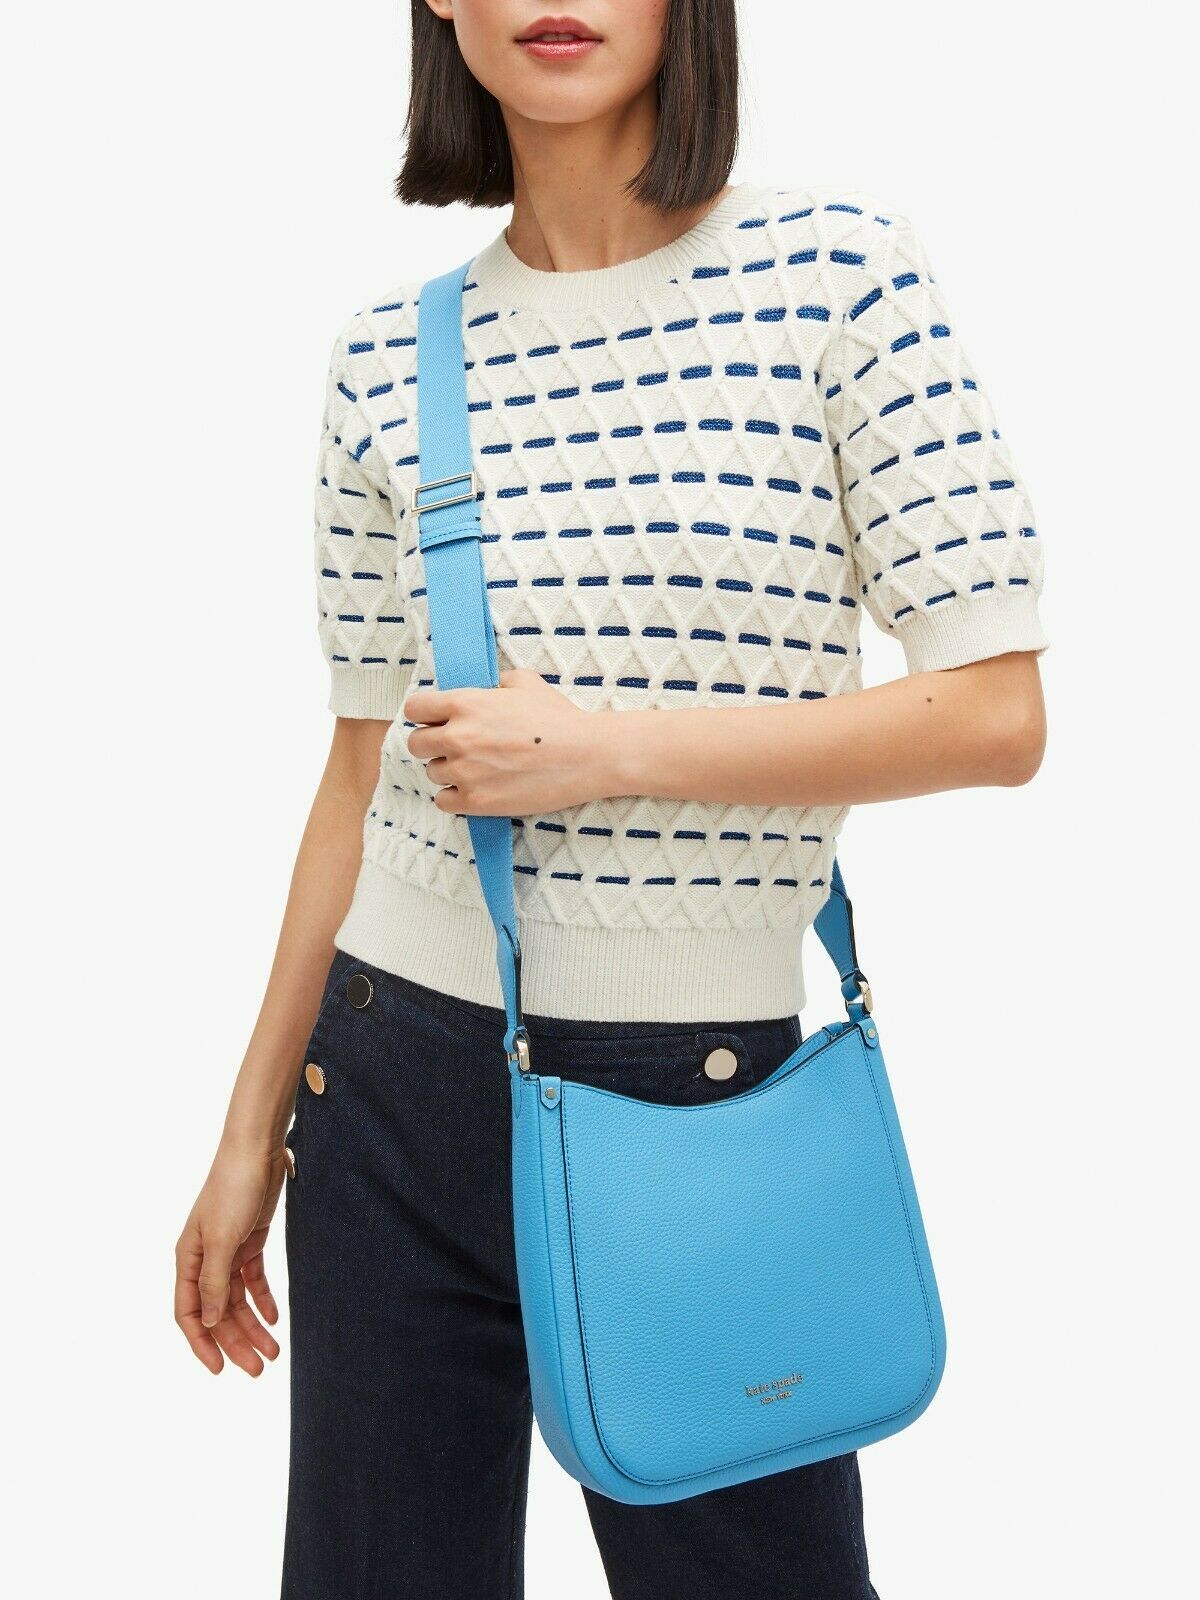 Kate Spade Roulette Messenger Bright Blue Leather Crossbody PXR00329 NWT $228 FS